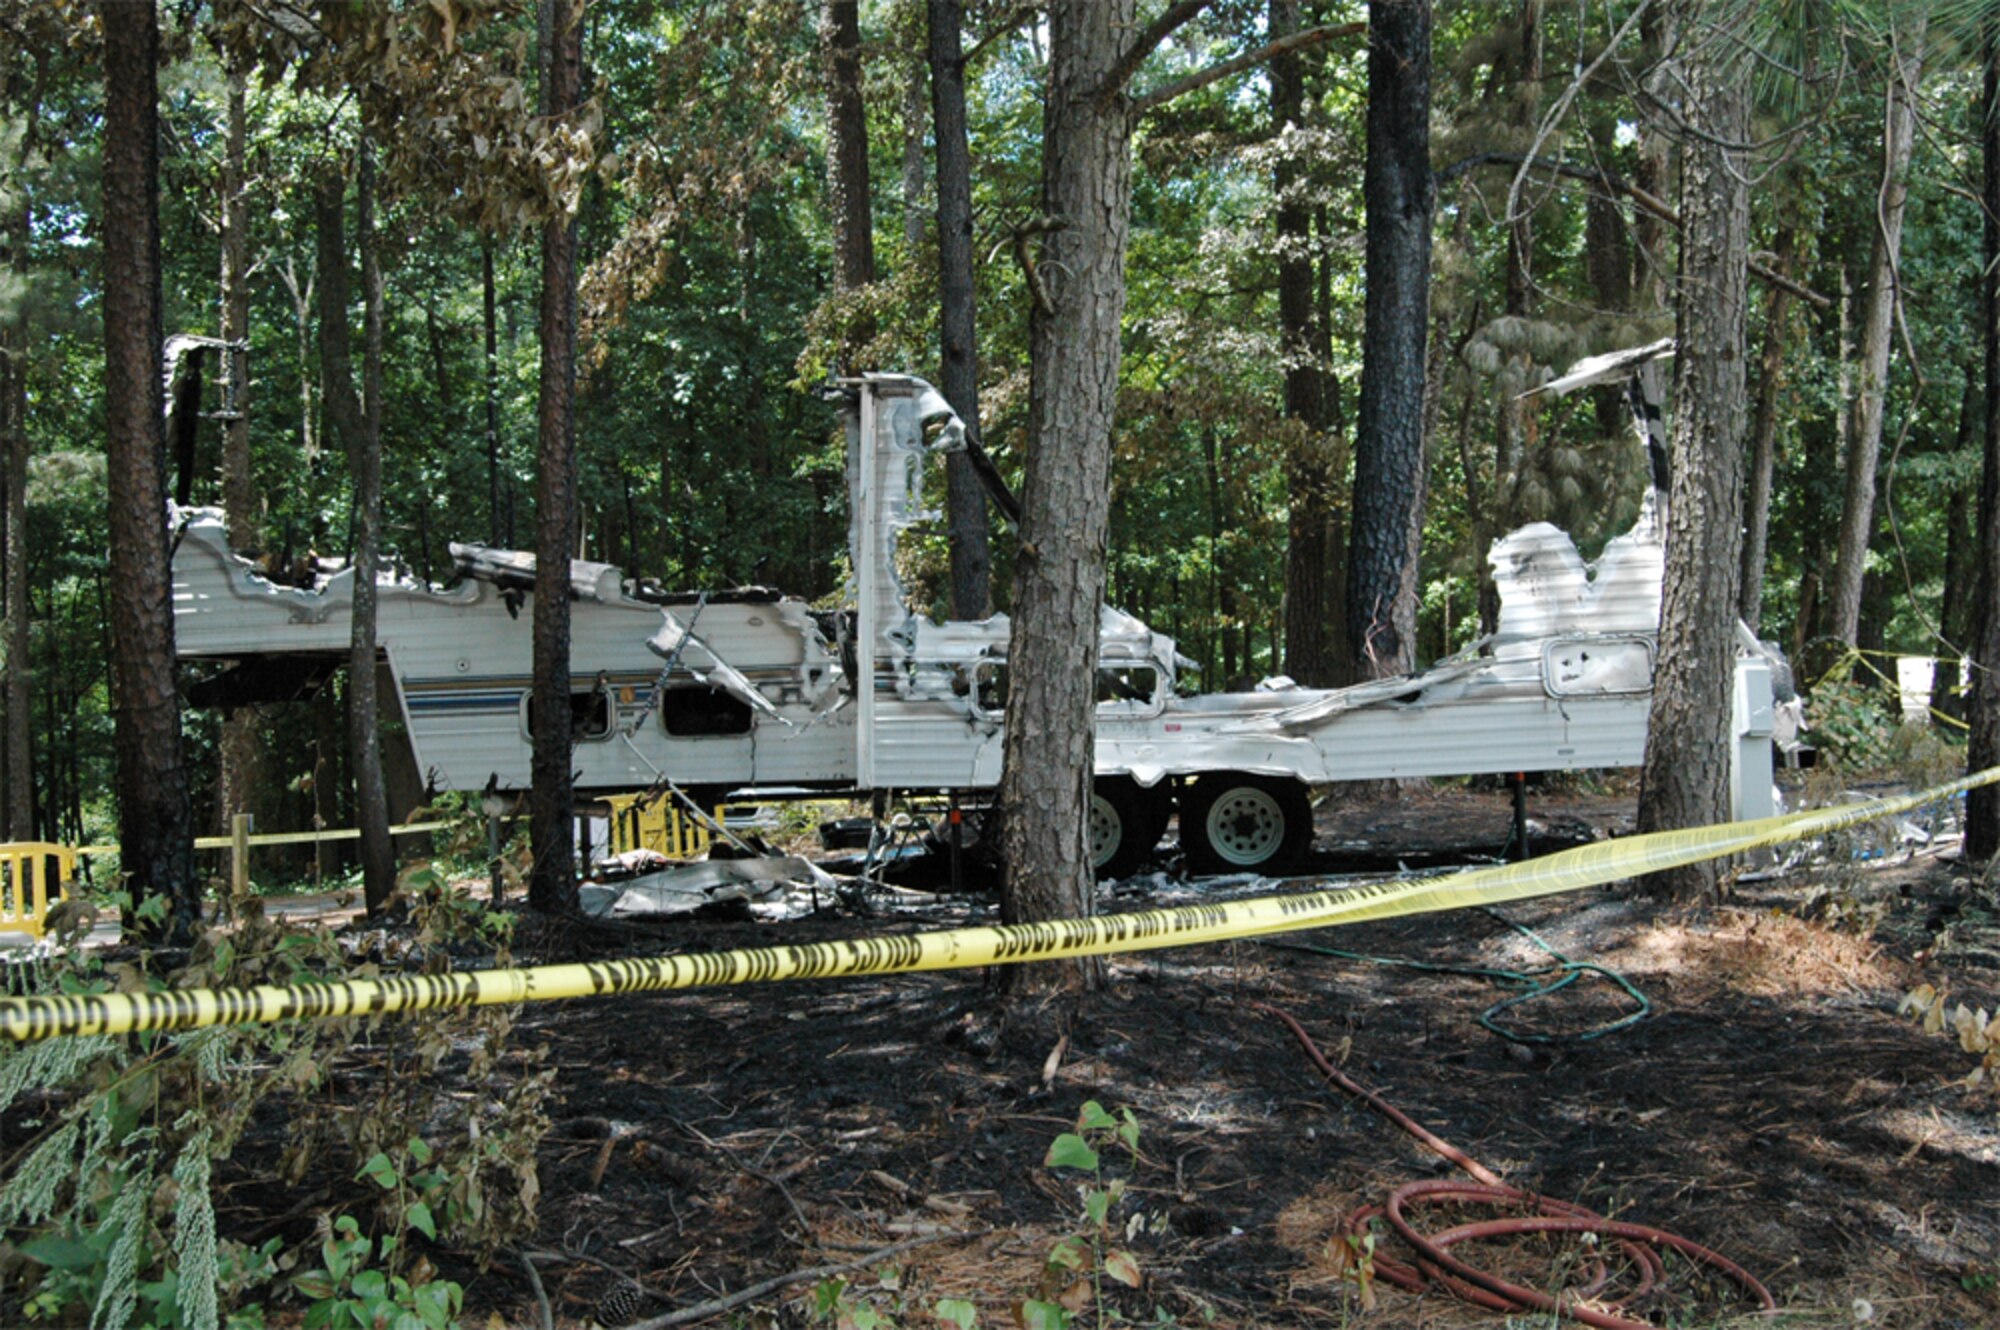 A side profile of the recreational trailer that caught on fire around 2:30 a.m. July 17. Nearly a dozen firefighters extinguished the blaze, which caused $30,000 in damages. The cause is currently under investigation. (U.S. Air Force photo/Travon Dennis)